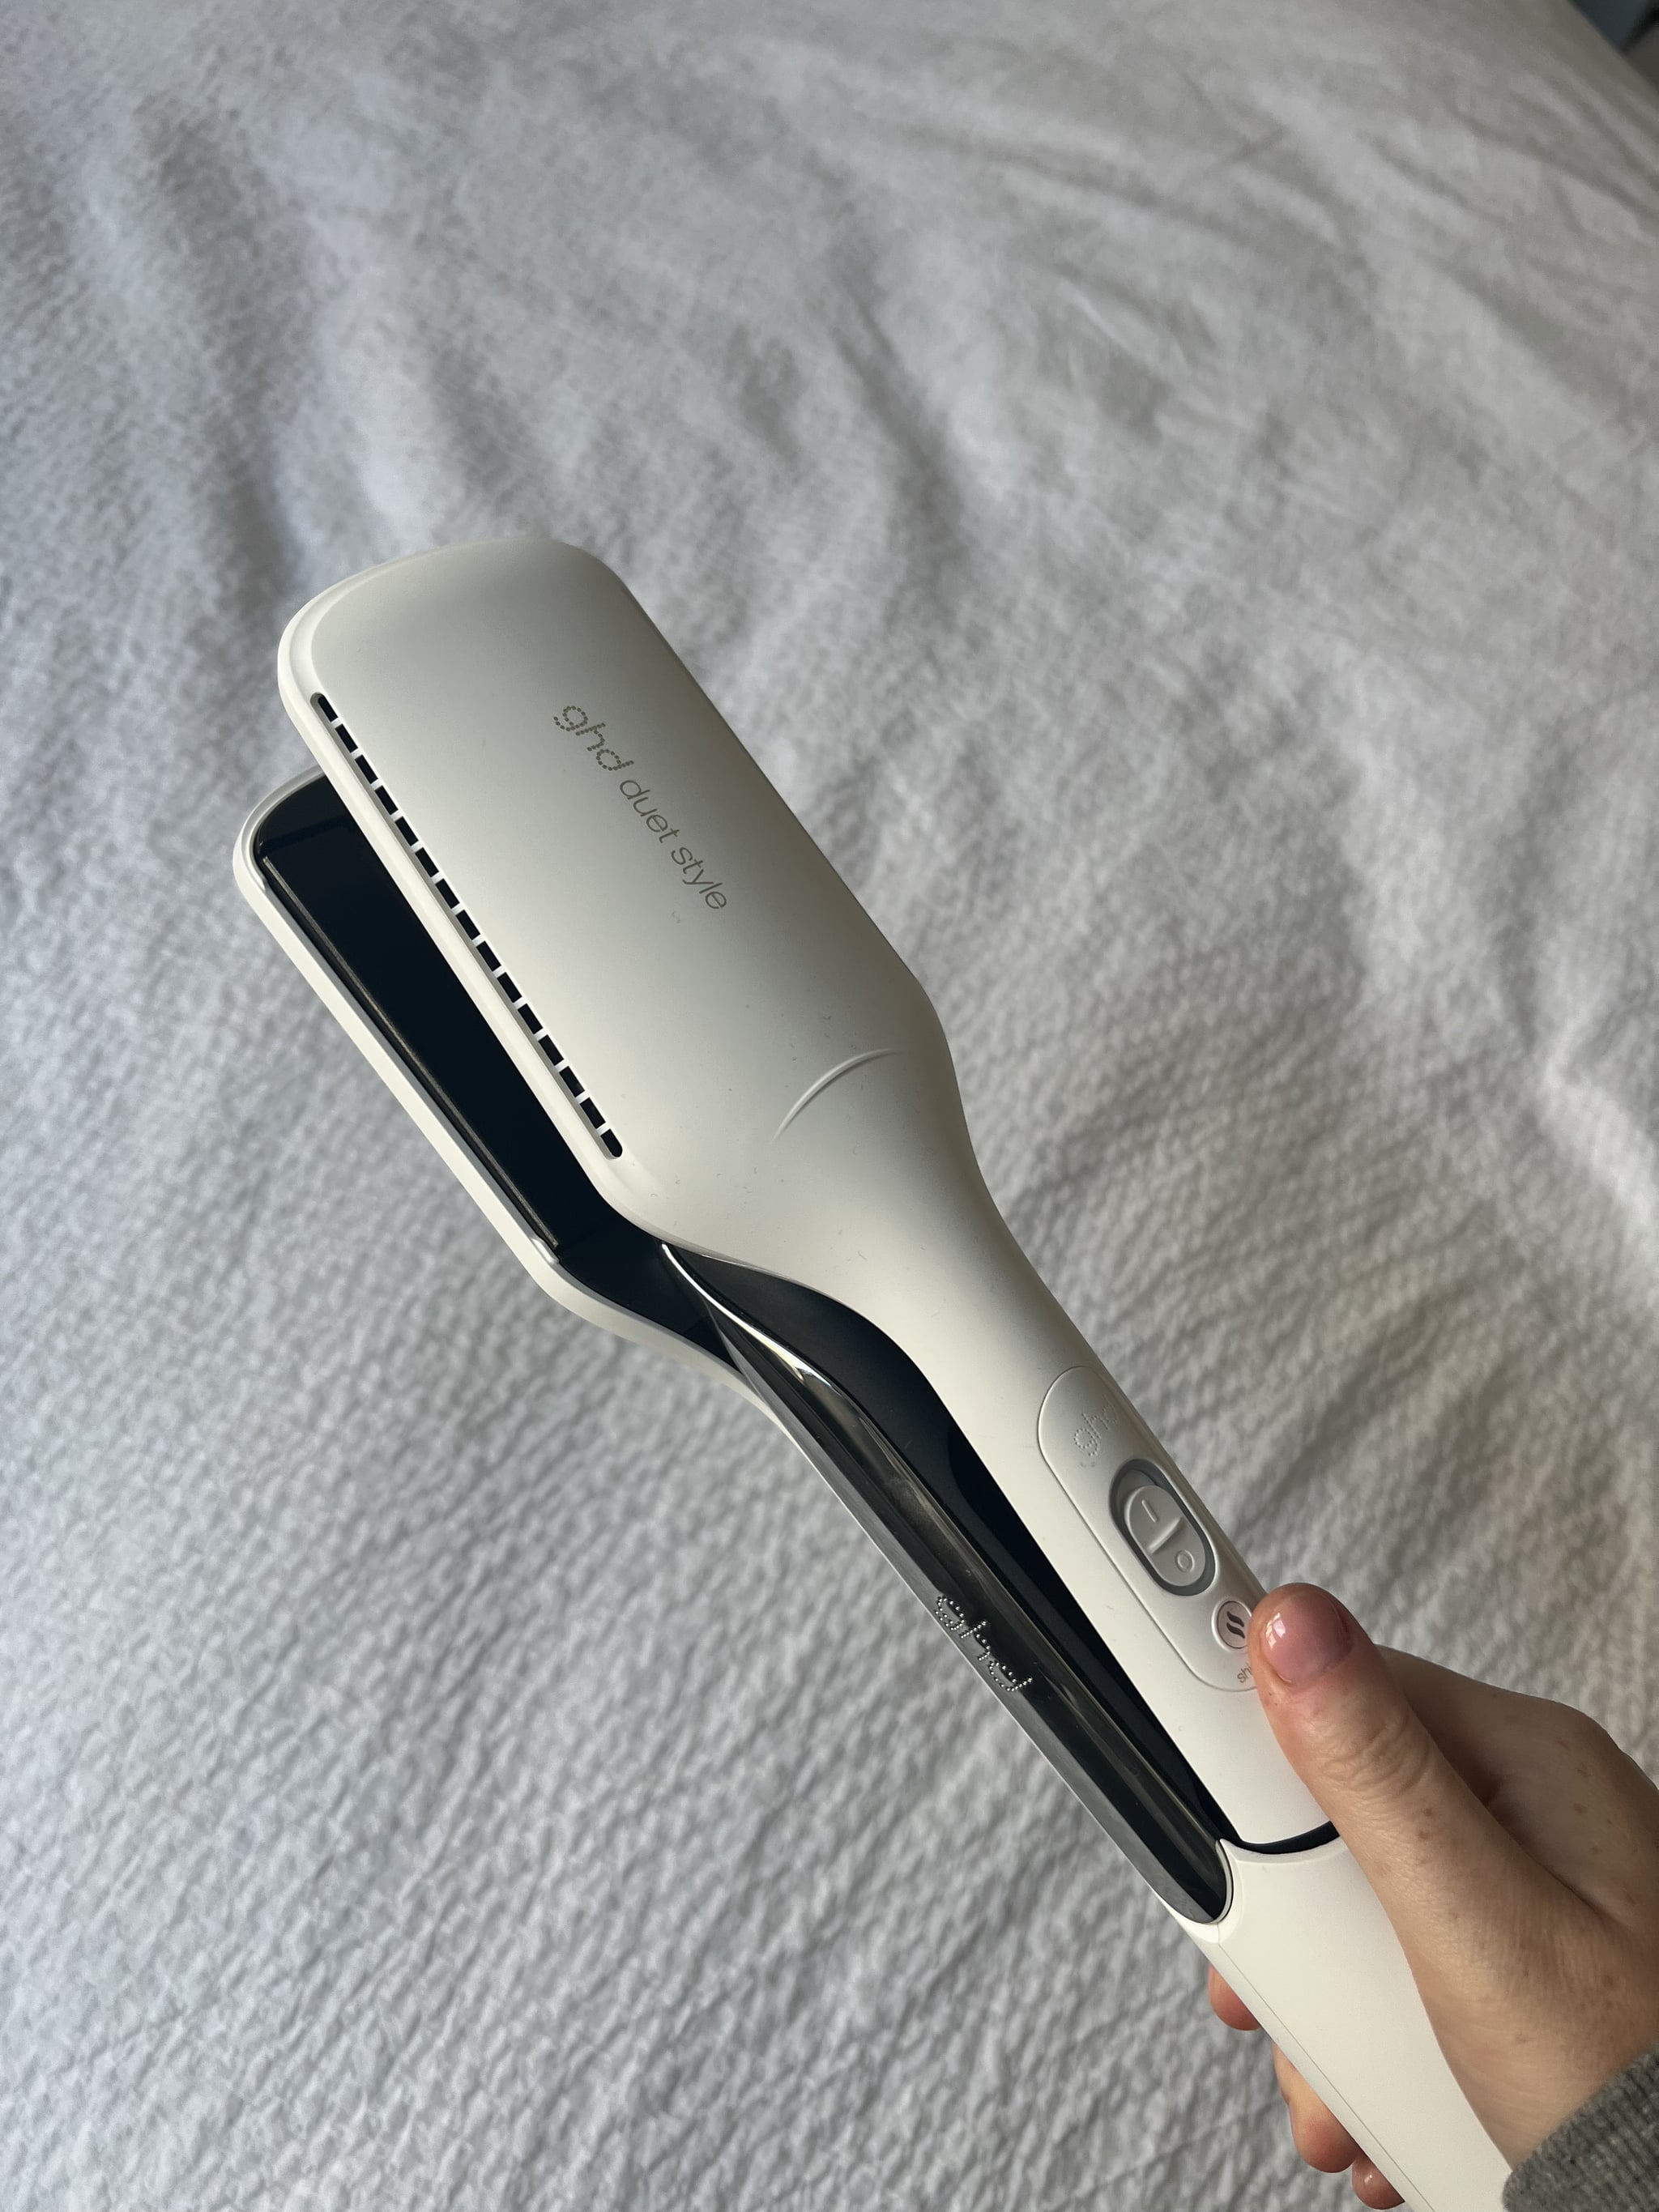 ghd Duet Style: the first 2-in-1 wet-to-dry styler has launched. We try it  out., Hair